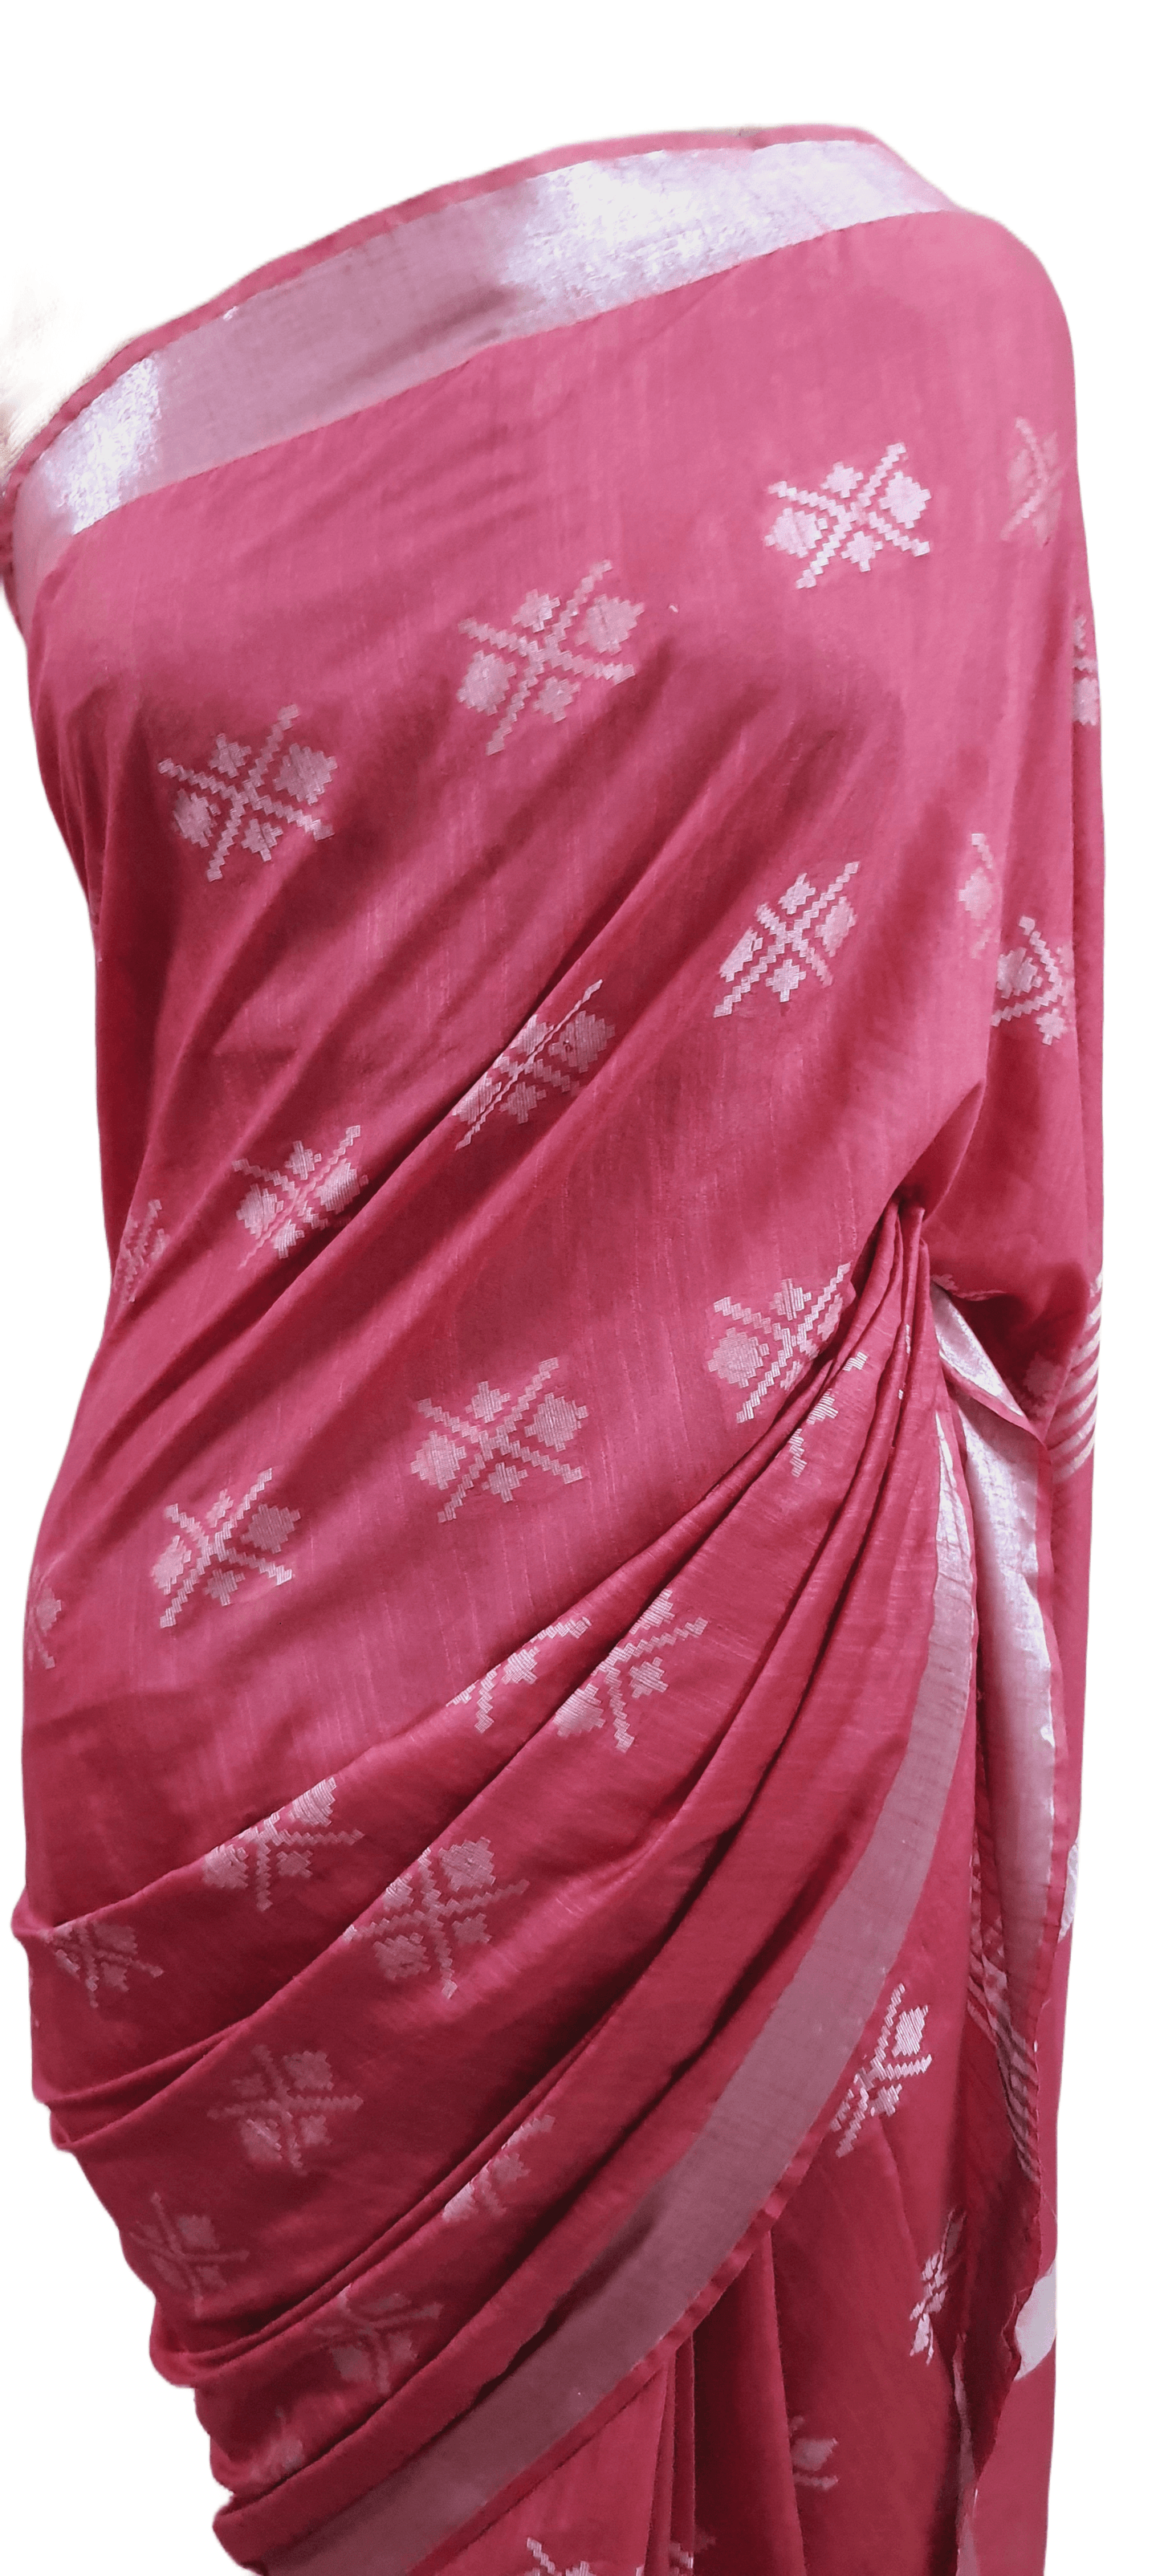 Pink Weaven Linen Cotton Saree with Pure Ikkat Cotton Blouse BHR07 - Ethnic's By Anvi Creations